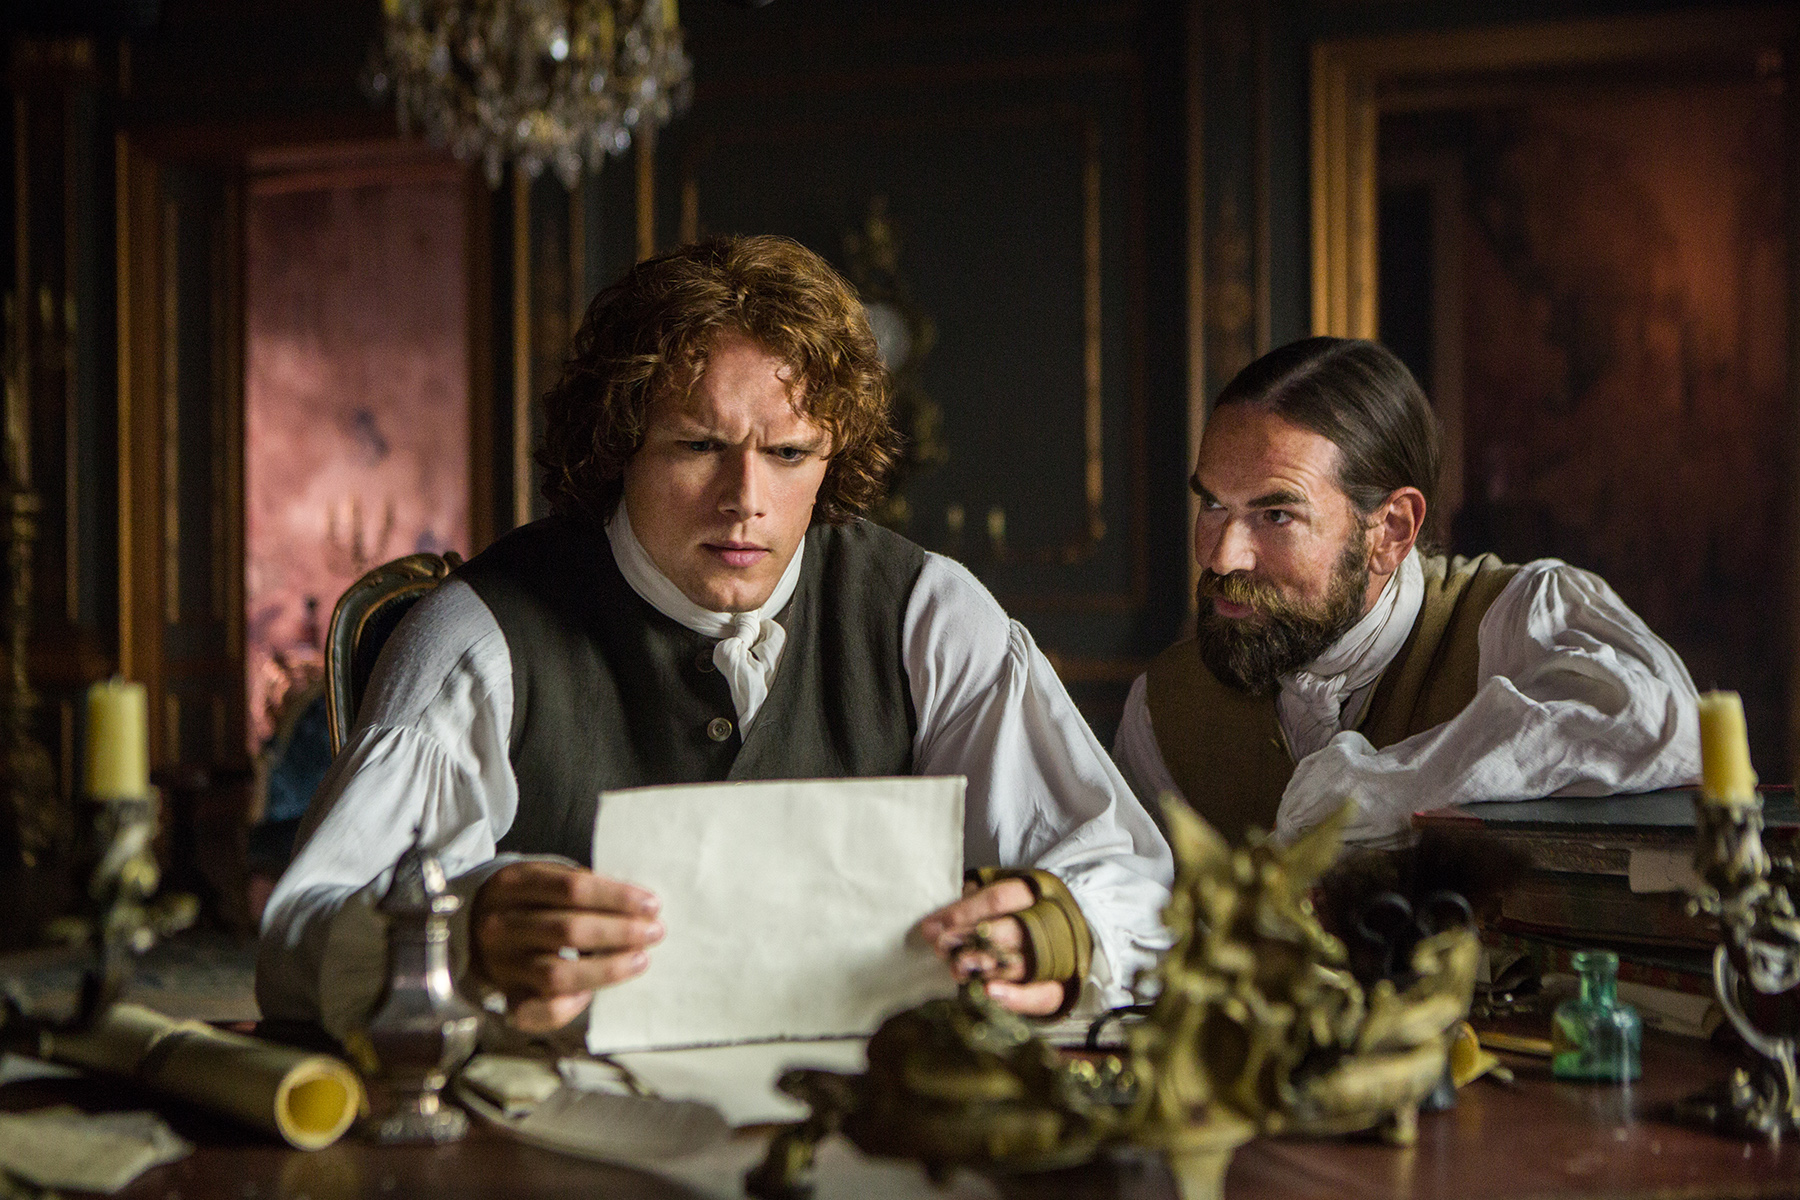 There's very little a good punch can't resolve between these two. (Left, Sam Heughan as Jamie Fraser. Right, Duncan Lacroix as Murtagh Fitzgibbons